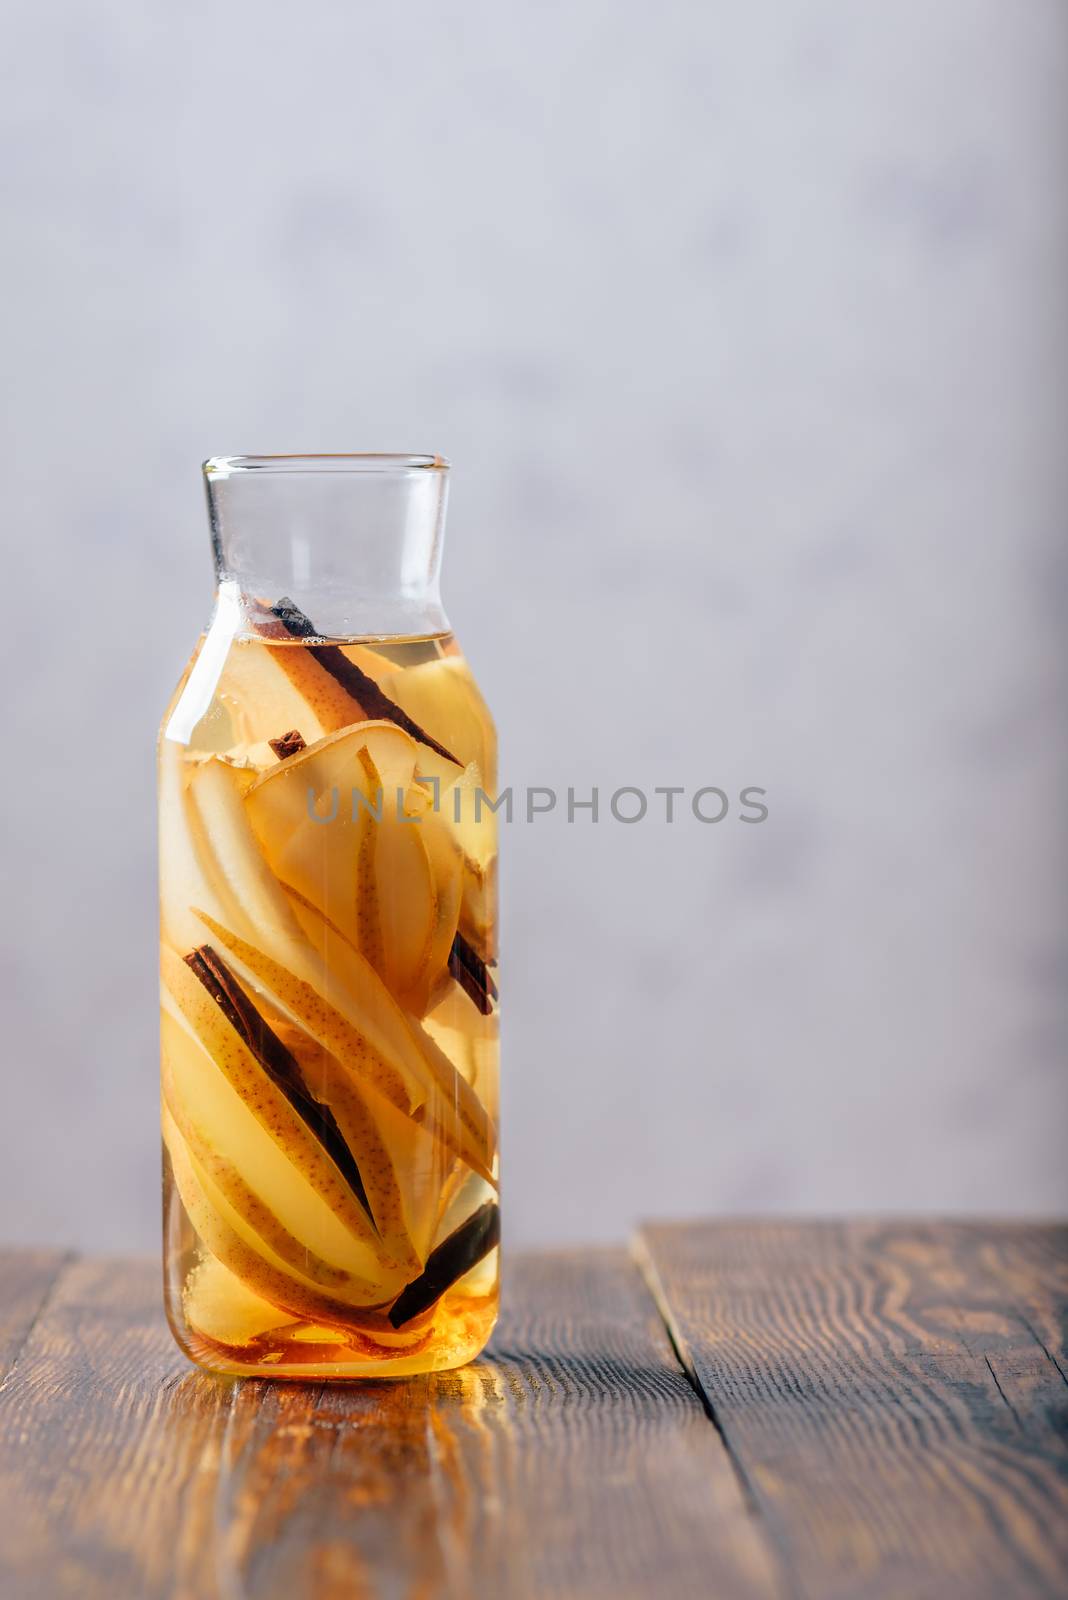 Water Flavored with Pear, Ginger Root and Cinnamon Stick. Vertical Orientation and Copy Space.